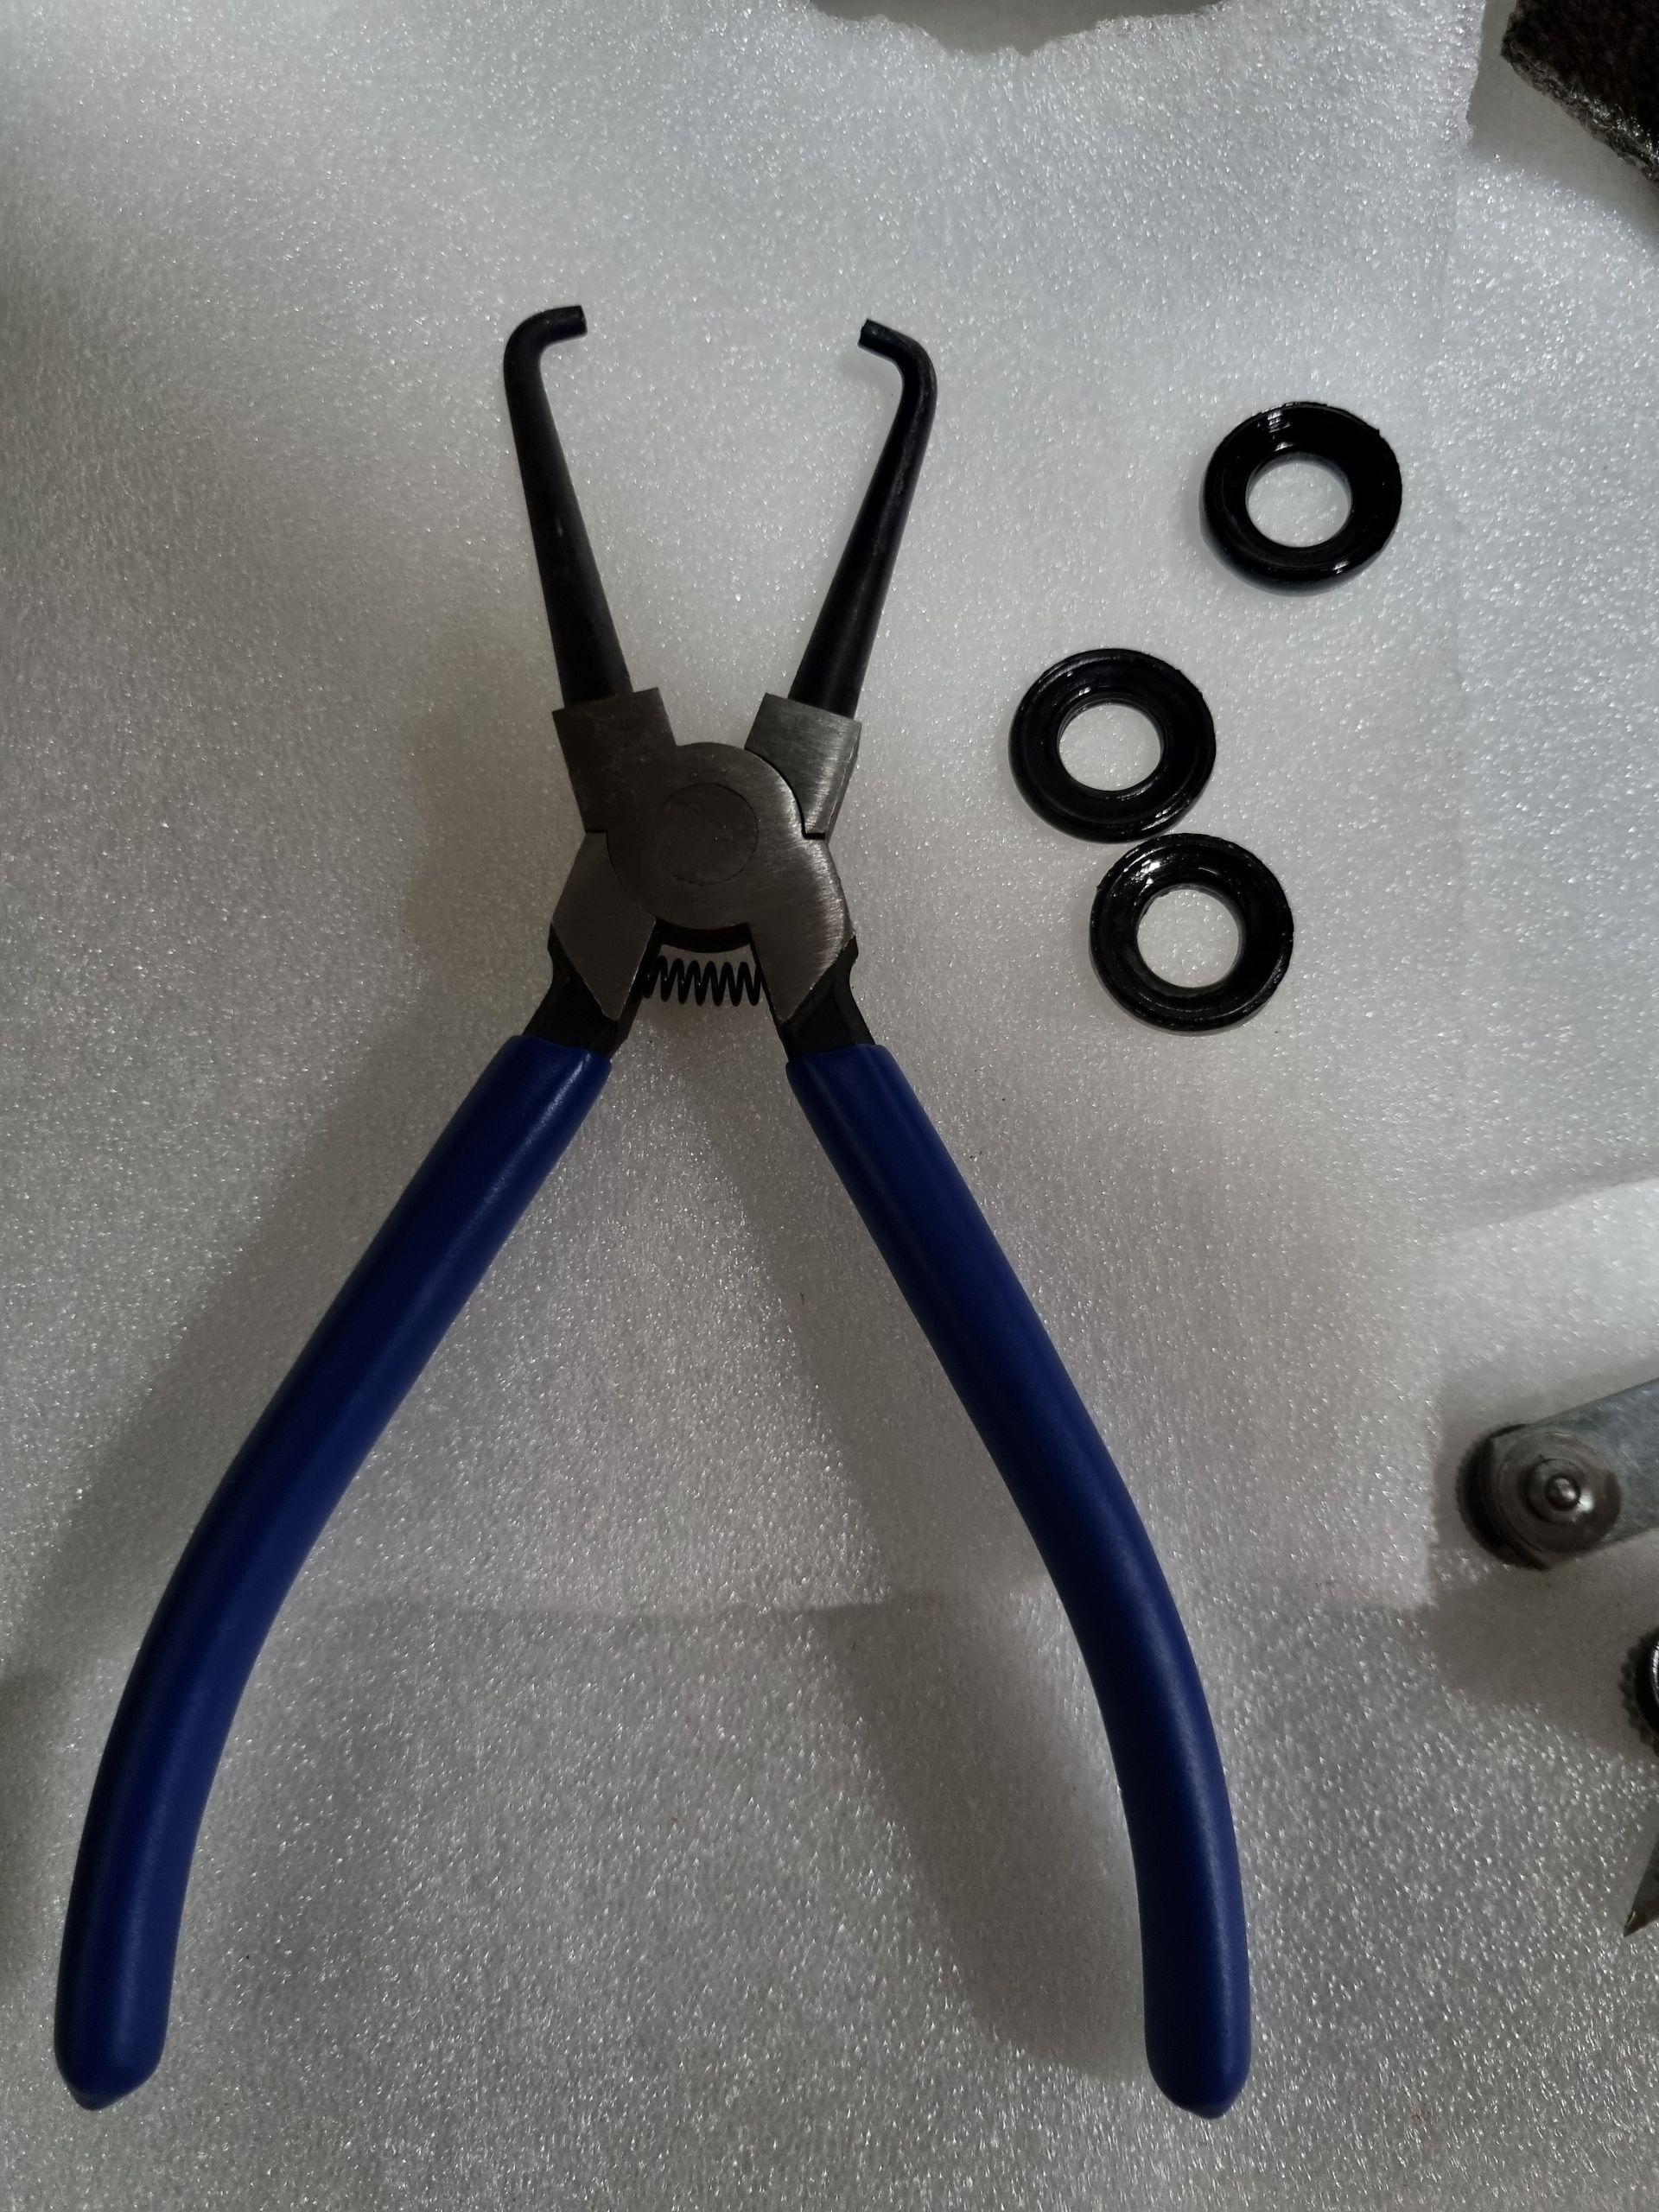 Fuel pipe coupling removal pliers